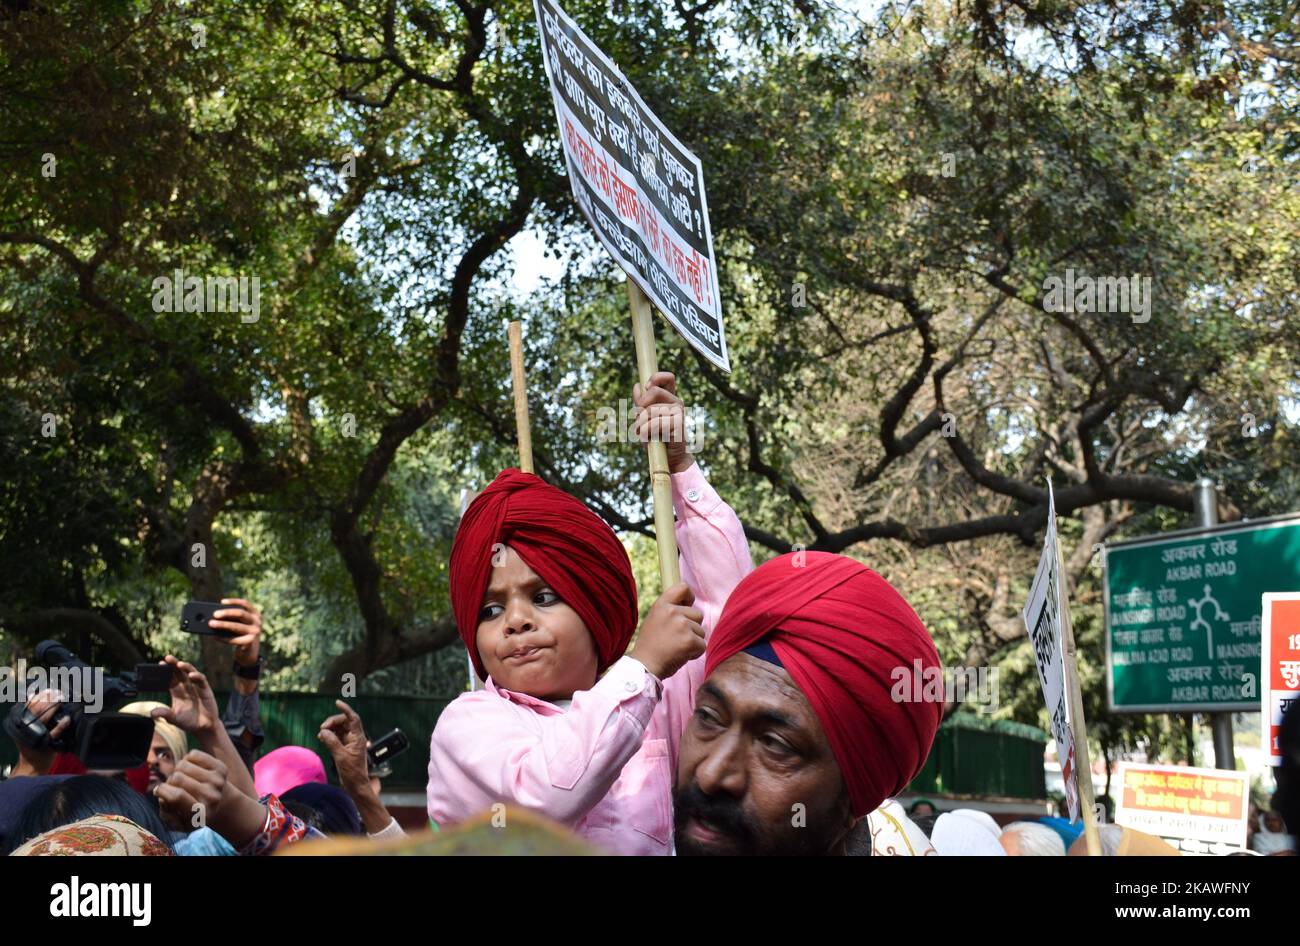 Protestors carry placards demanding arrest of Congress leader Jagdish Tytler for his alleged involvement in the 1984 anti-Sikh riots in New Delhi. 9th February, 2018 (Photo by Sahiba Chawdhary/NurPhoto) Stock Photo